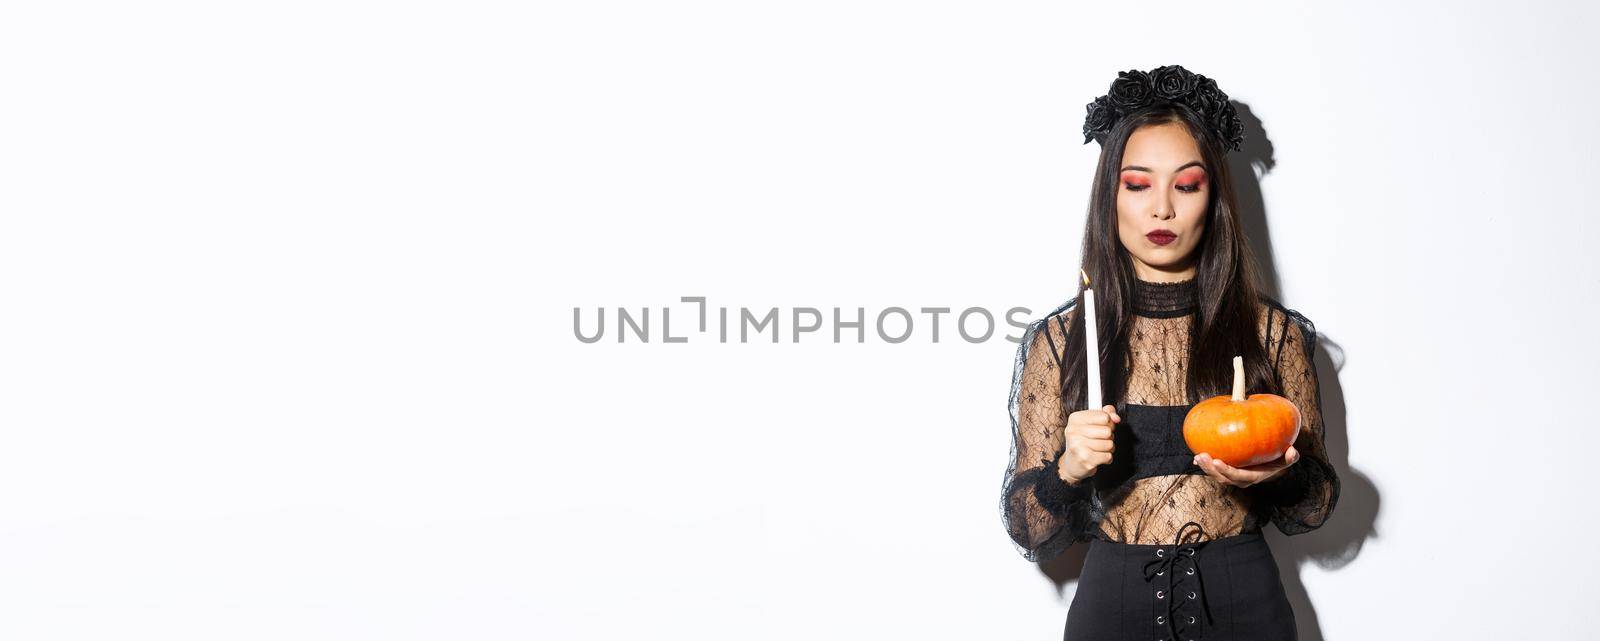 Myserious asian wicked witch in gothic dress, looking at lit candle, holding pumpkin, standing over white background by Benzoix